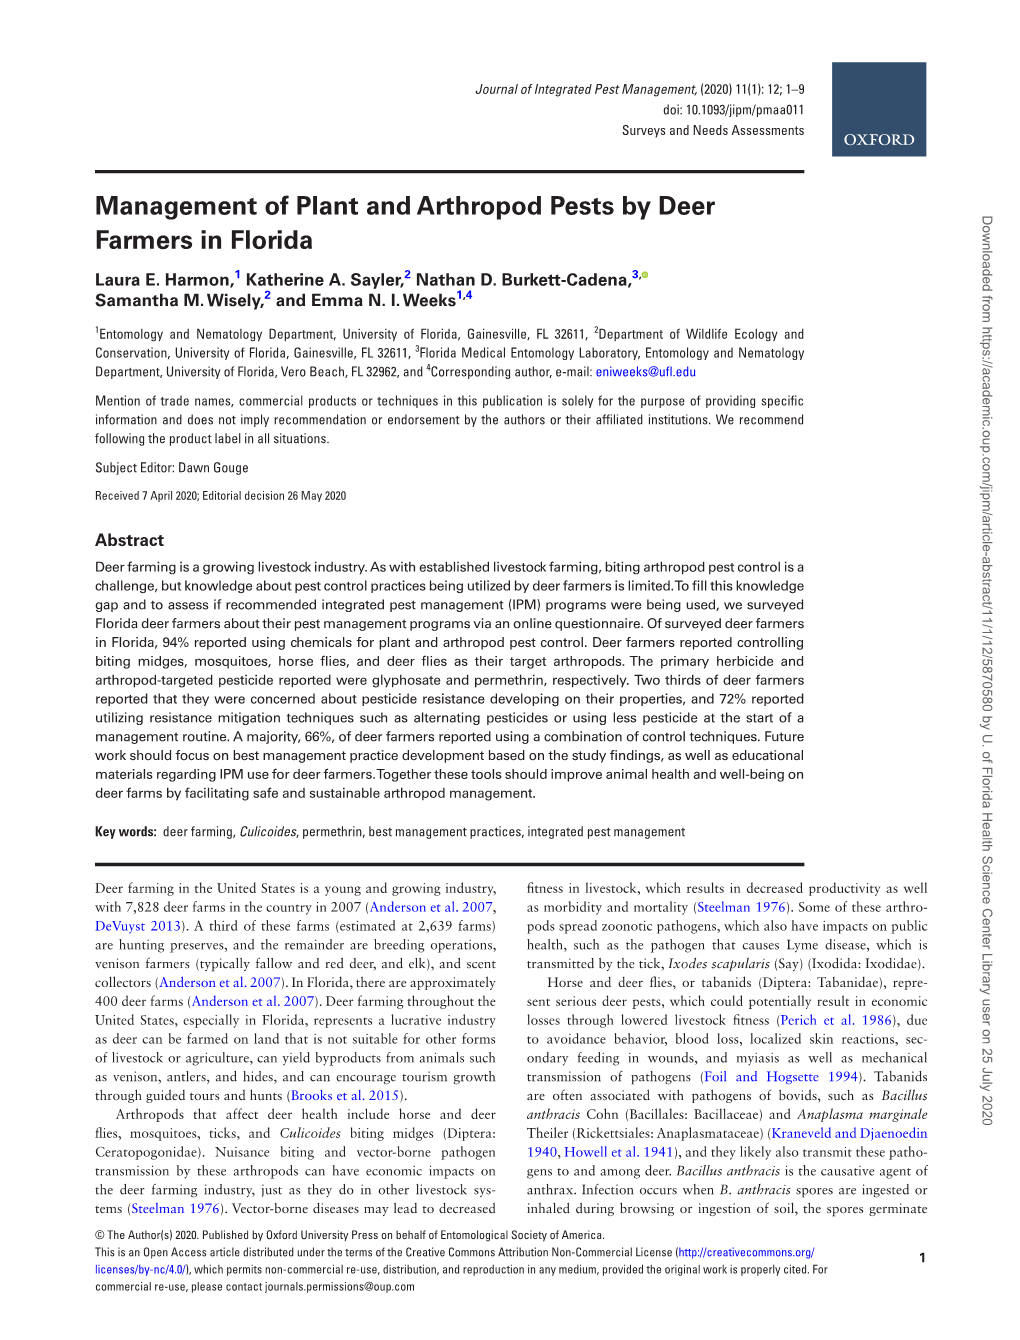 Management of Plant and Arthropod Pests by Deer Farmers in Florida